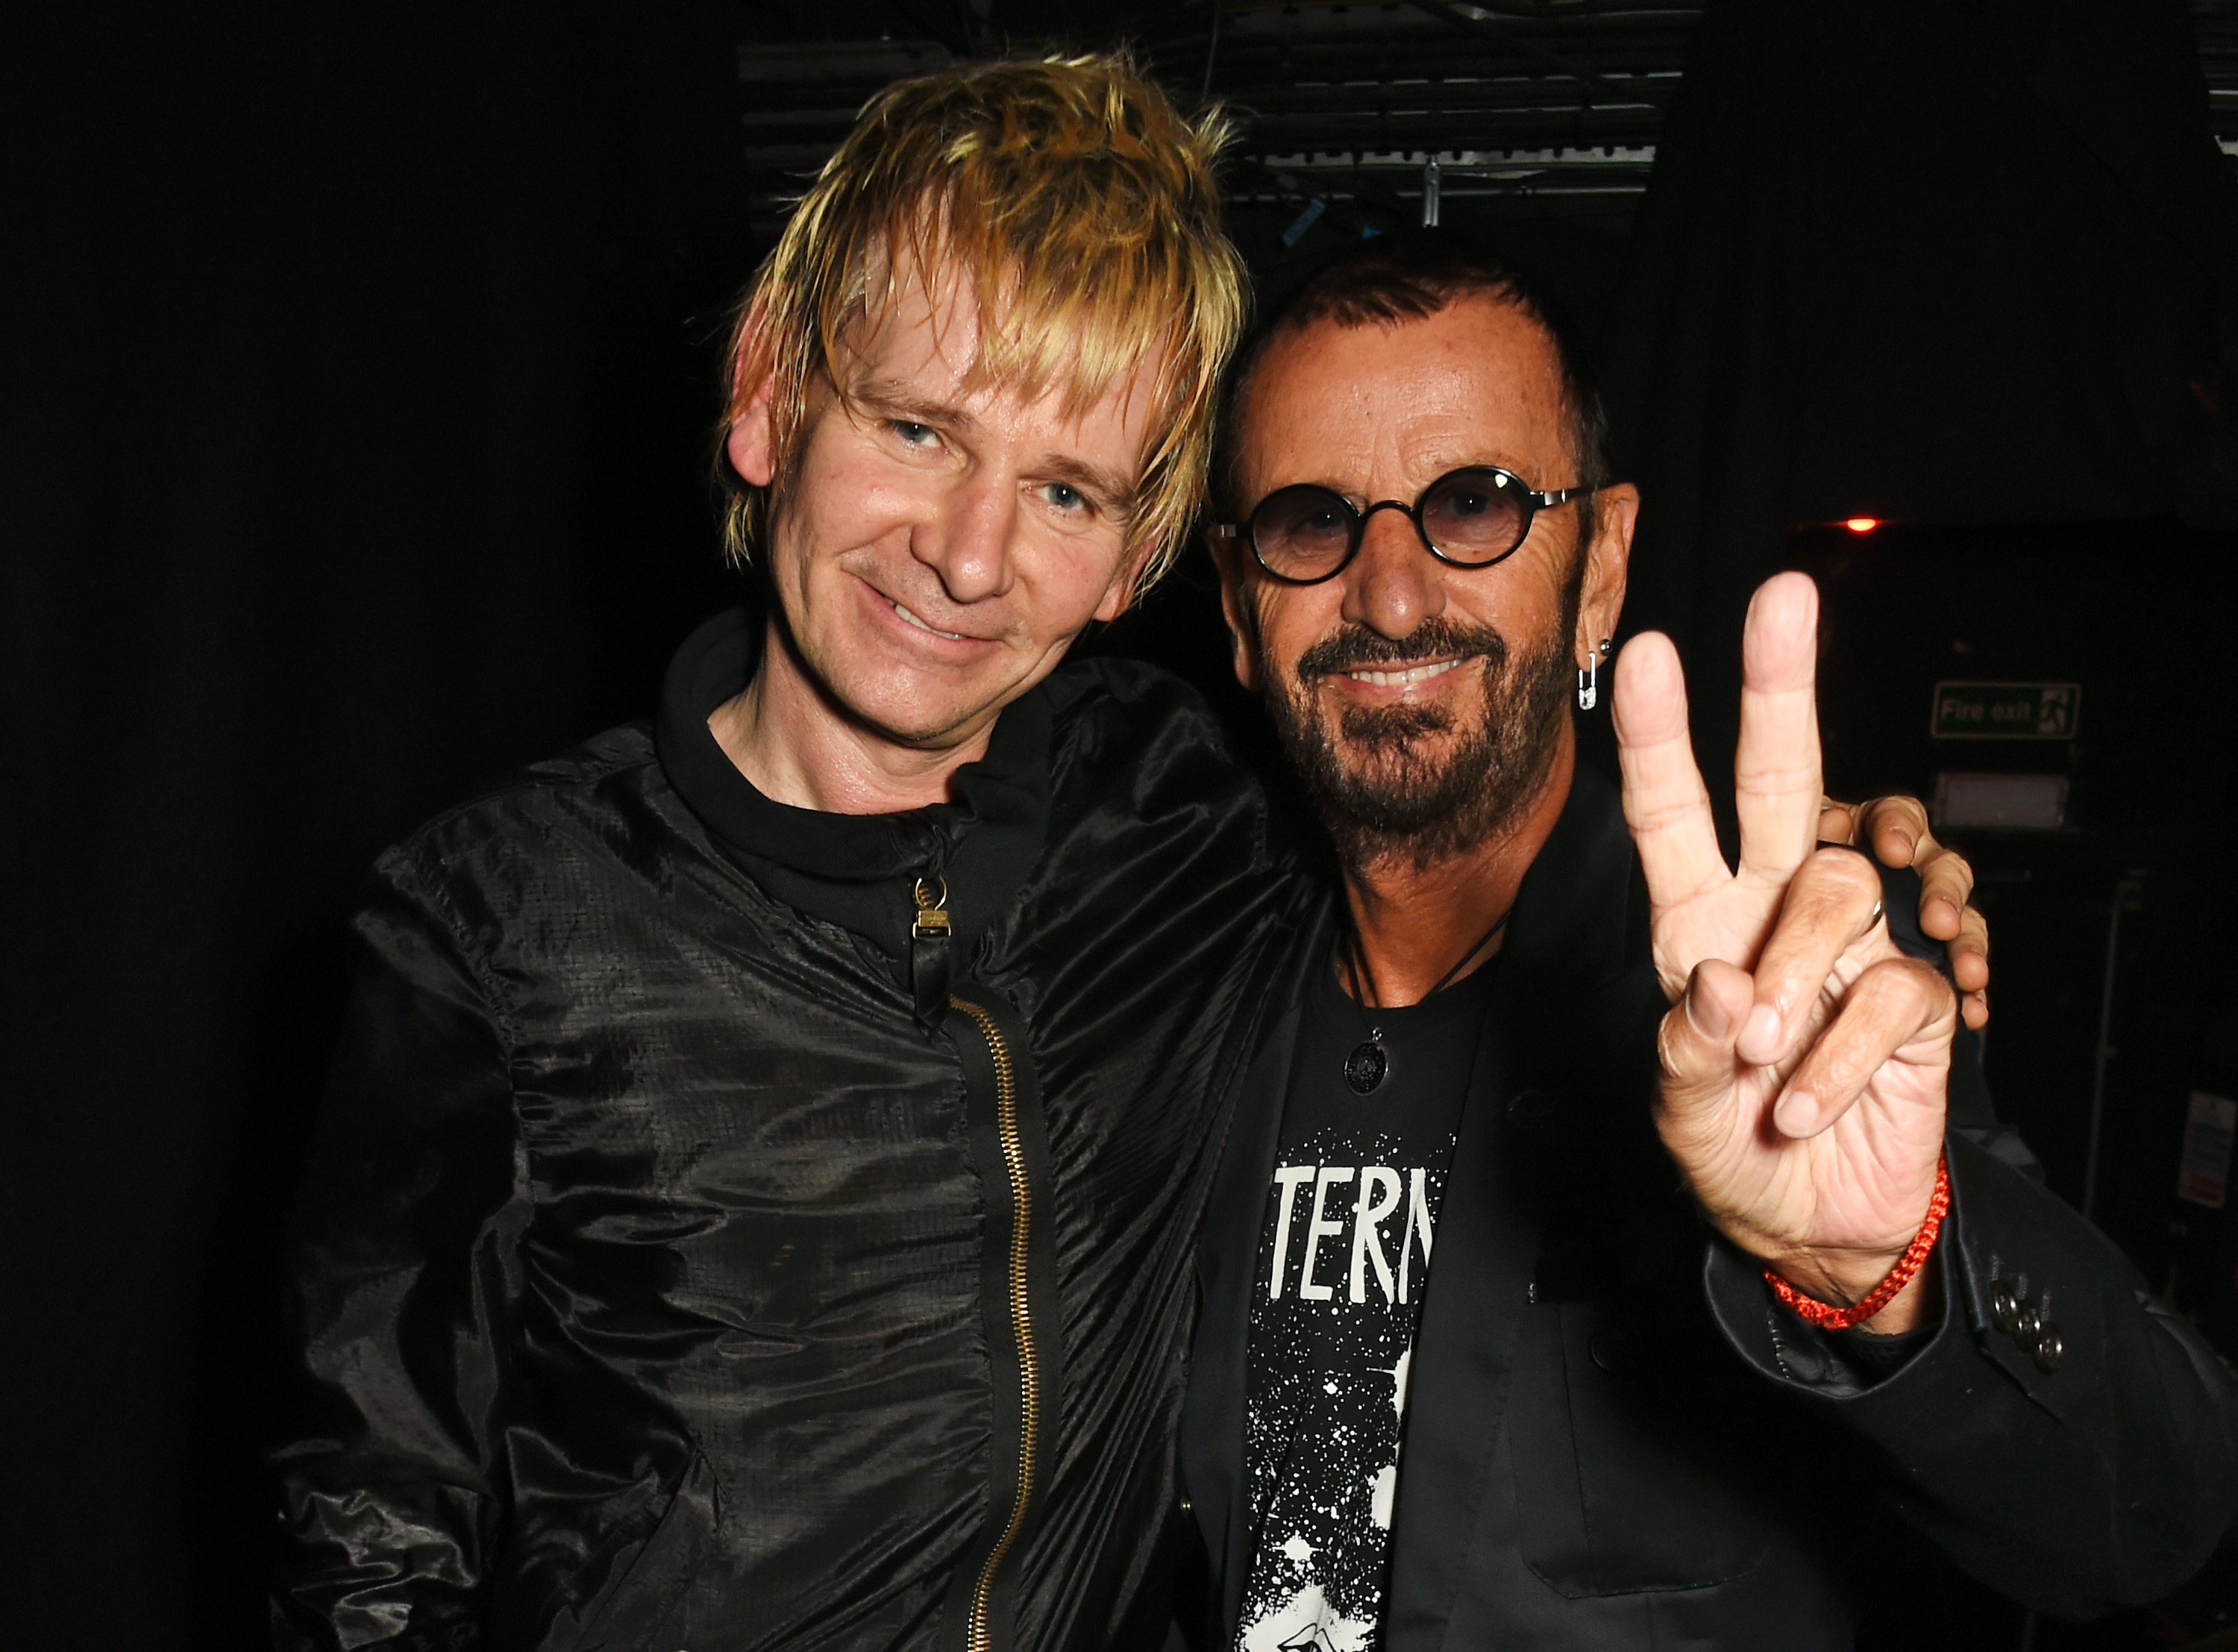 Ringo Starr holds up a peace sign and stands with his son, Zak Starkey.